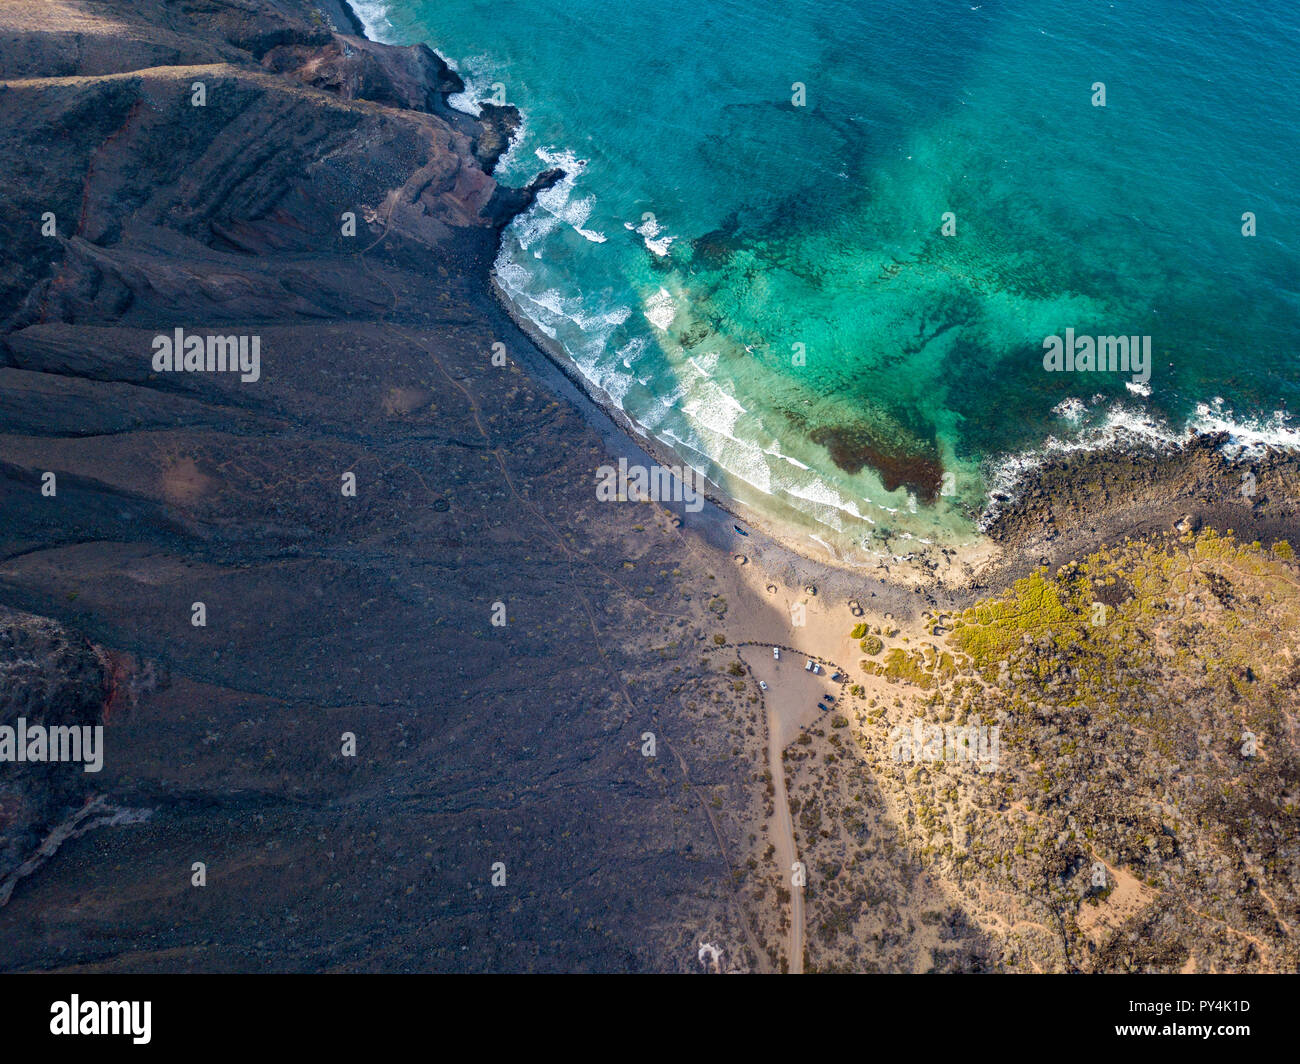 Aerial view of a crystal clear sea with waves and surfers. Playa De La Canteria. Orzola, Lanzarote, Canary Islands. Spain. Waves crashing on the beach Stock Photo